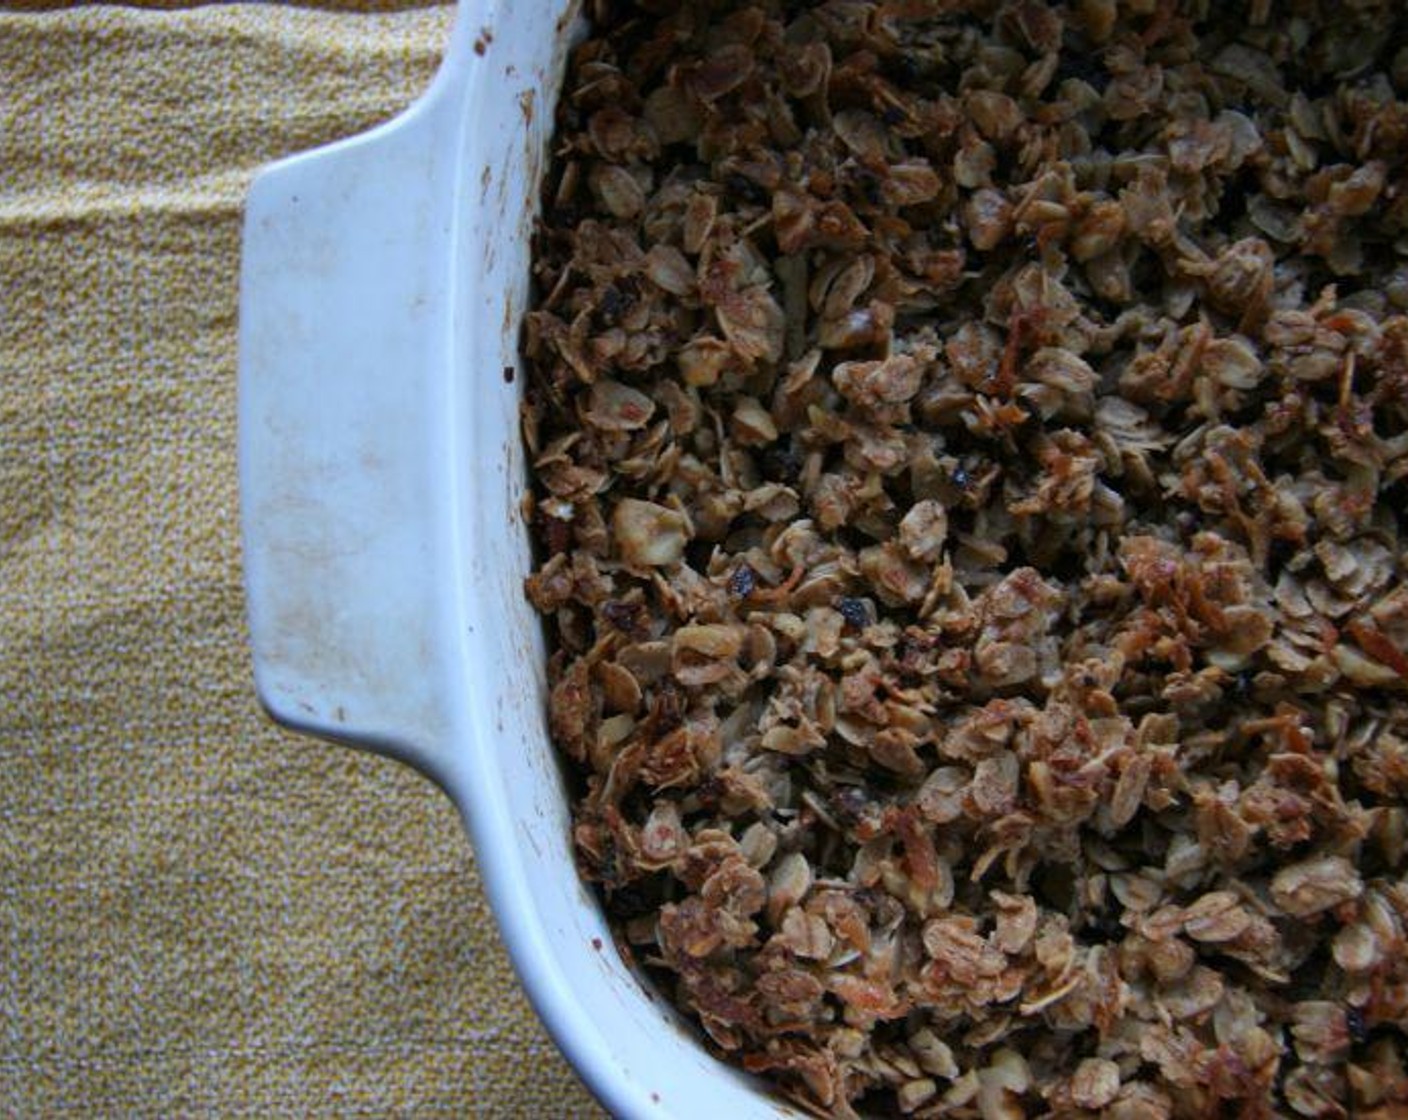 step 4 Pour into the greased dish and bake for 20 to 30 minutes, stirring half way through. The granola will turn golden brown and become very fragrant. Serve and enjoy!